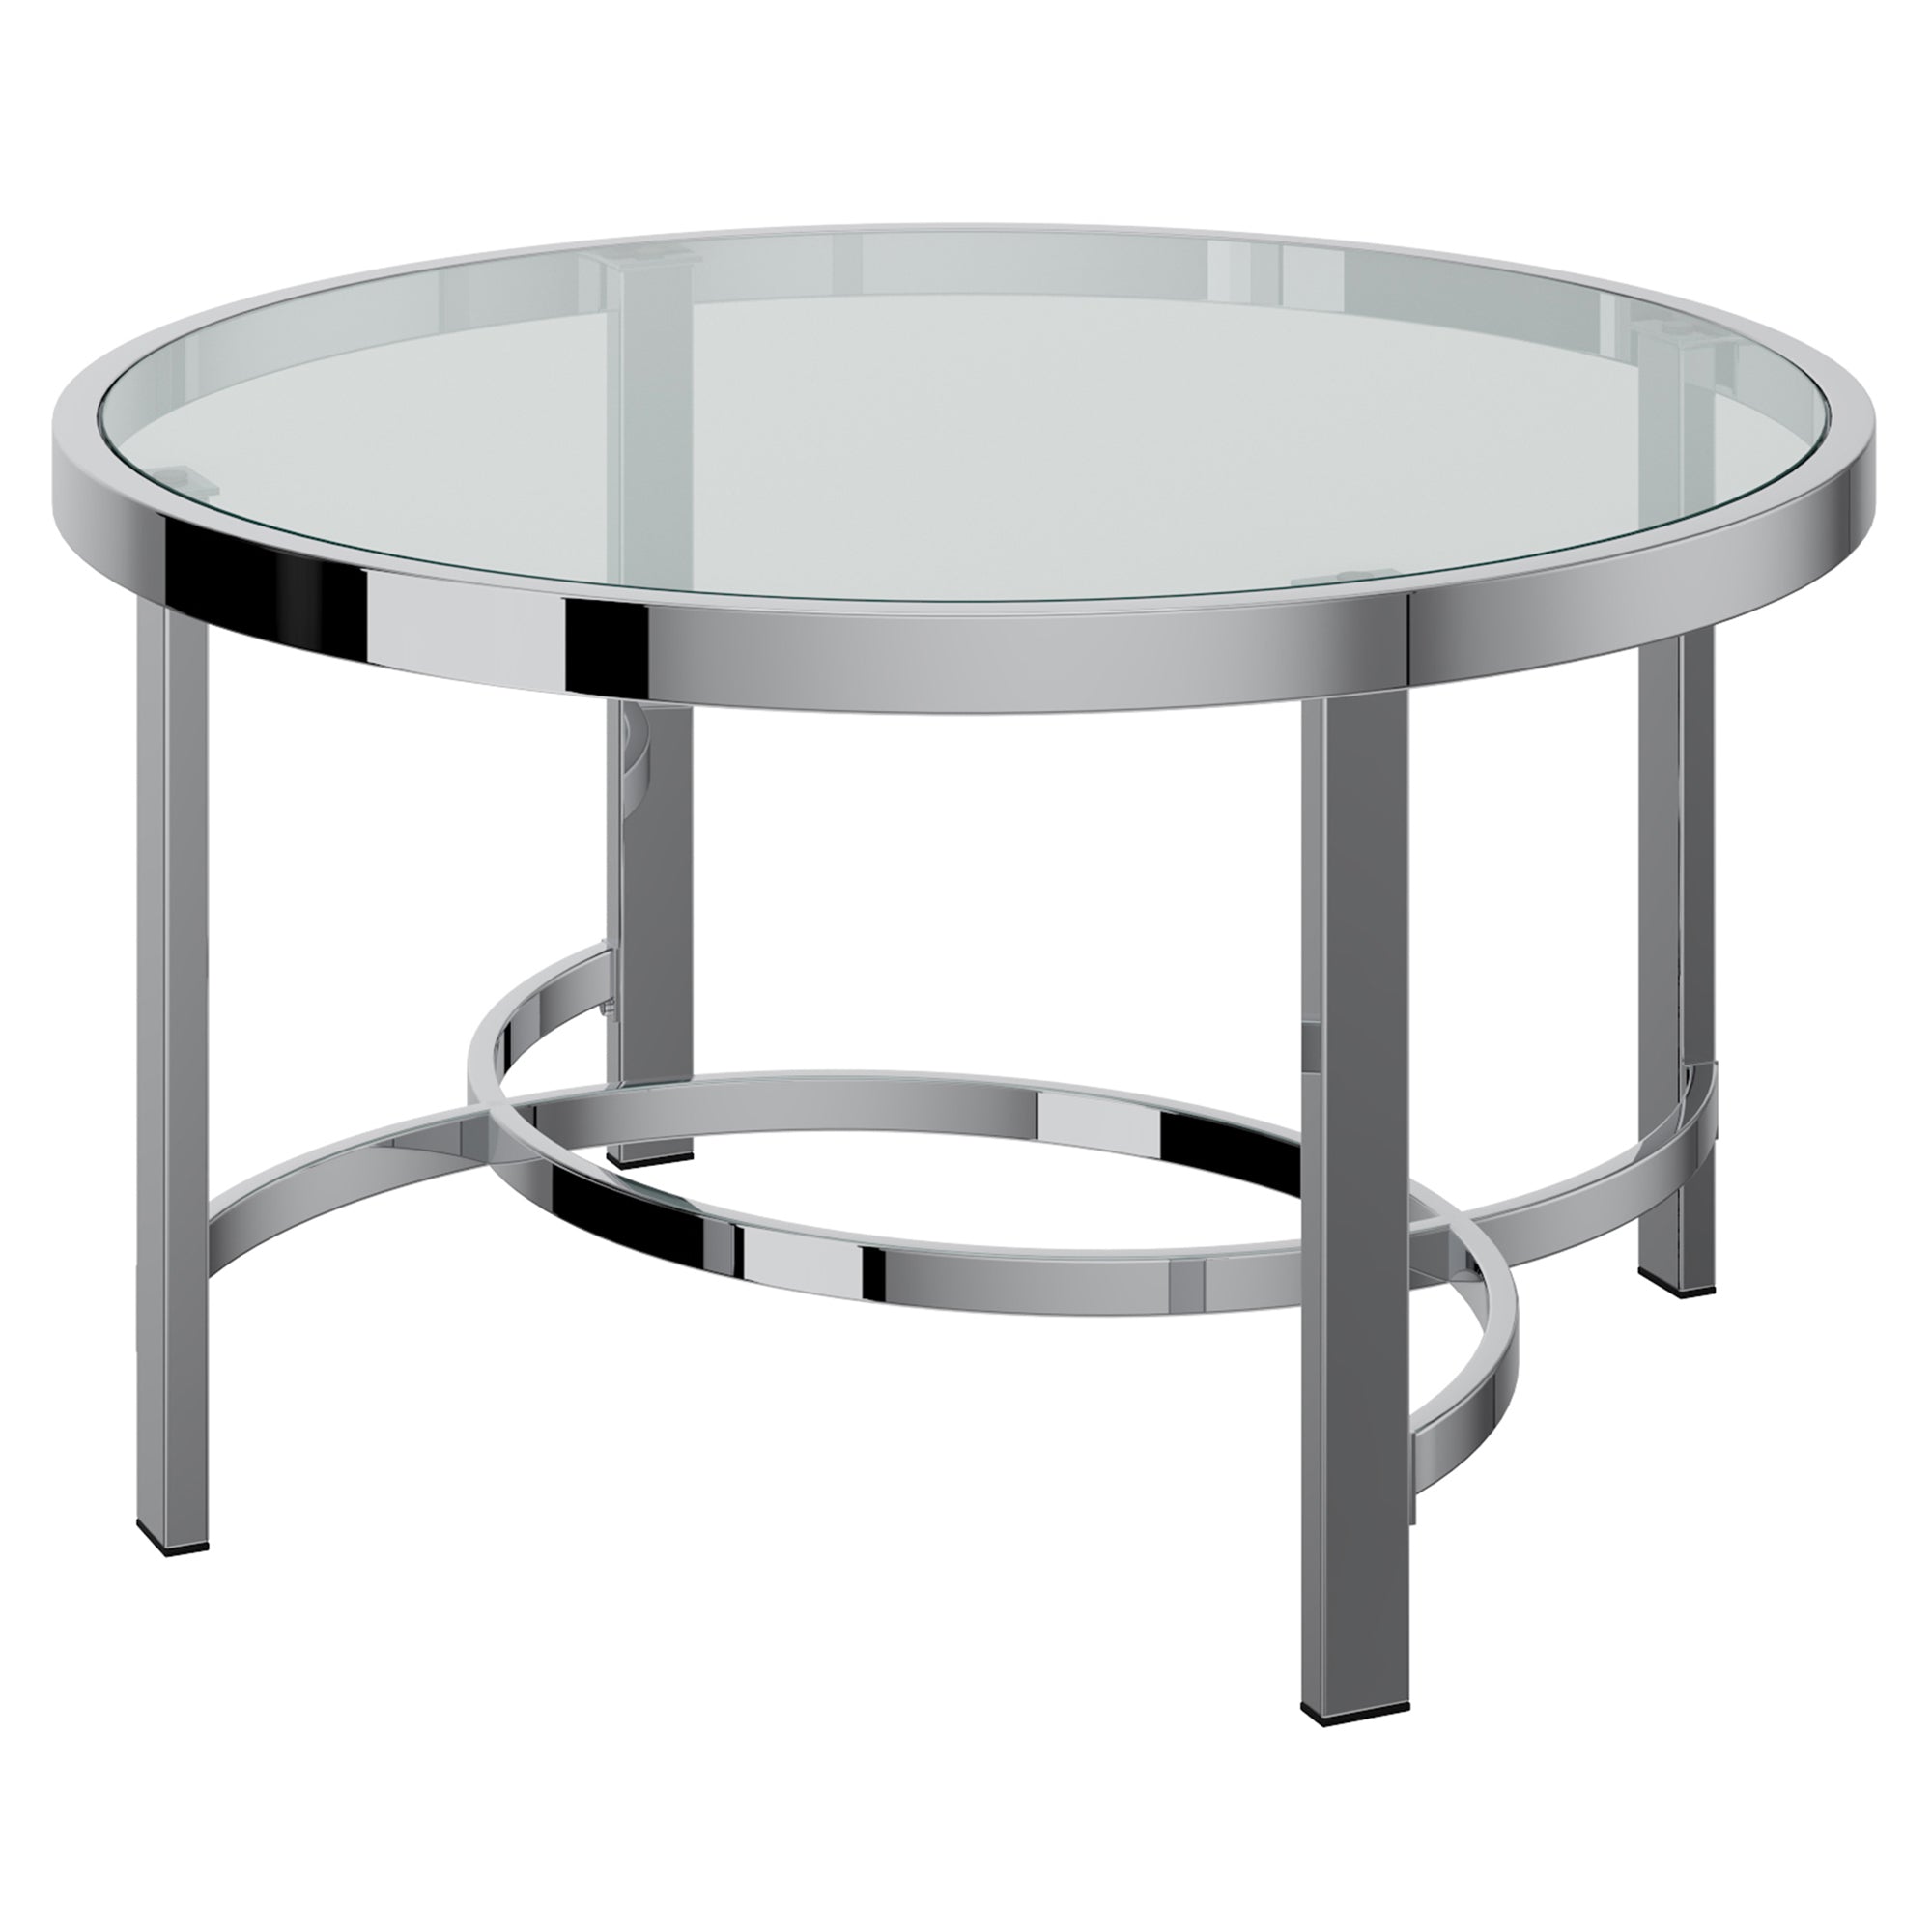 Strata Coffee Table in Chrome 301-746